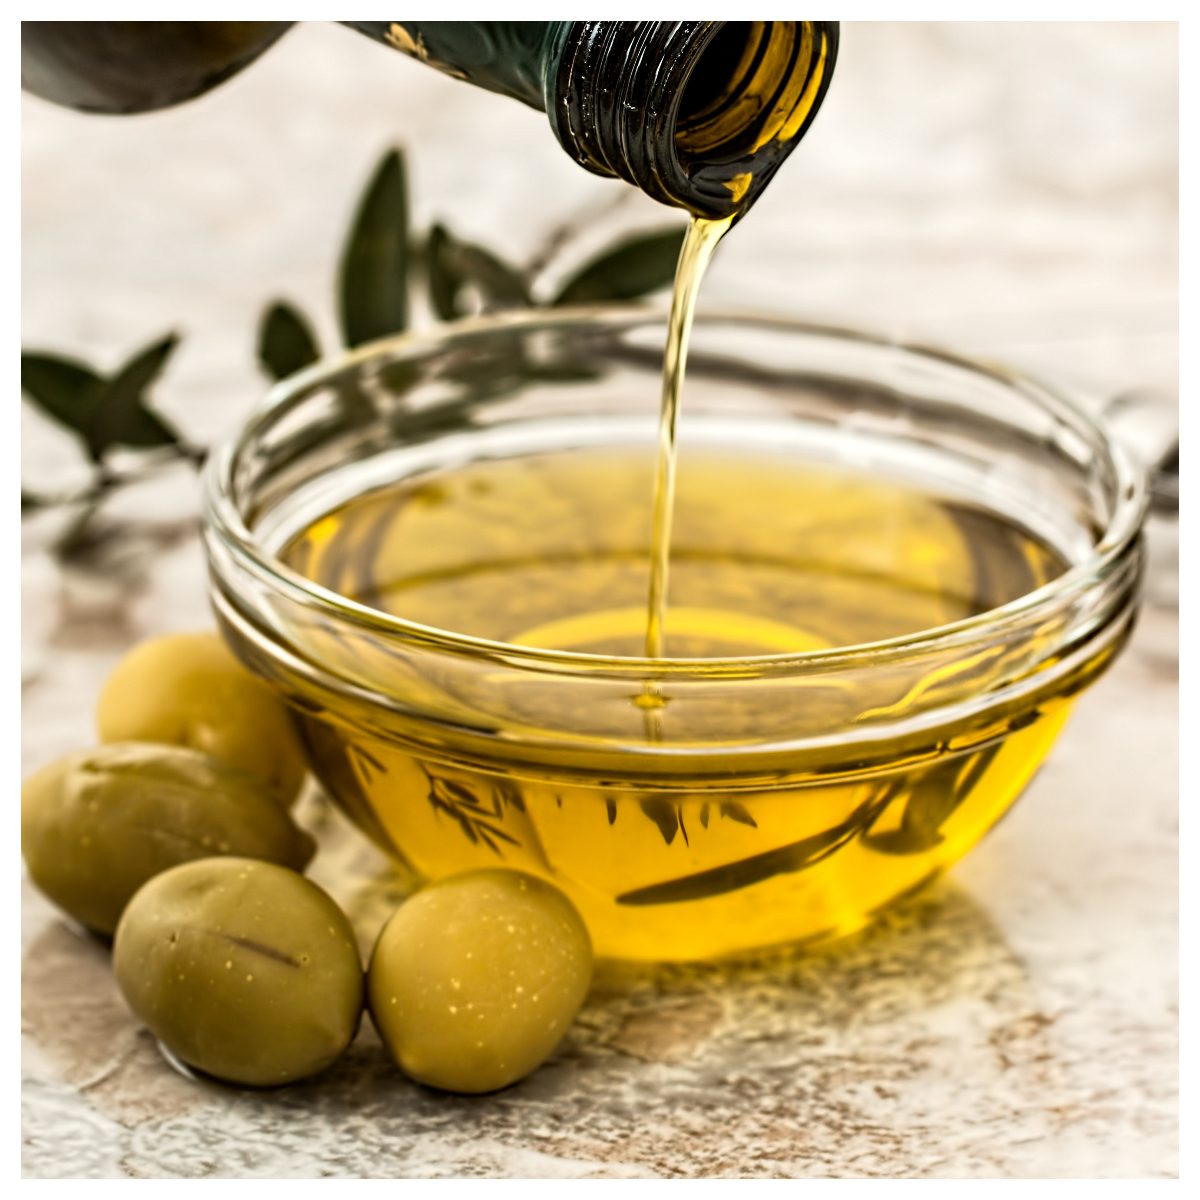 Top 17 benefits of grapeseed oil, and ways to use it